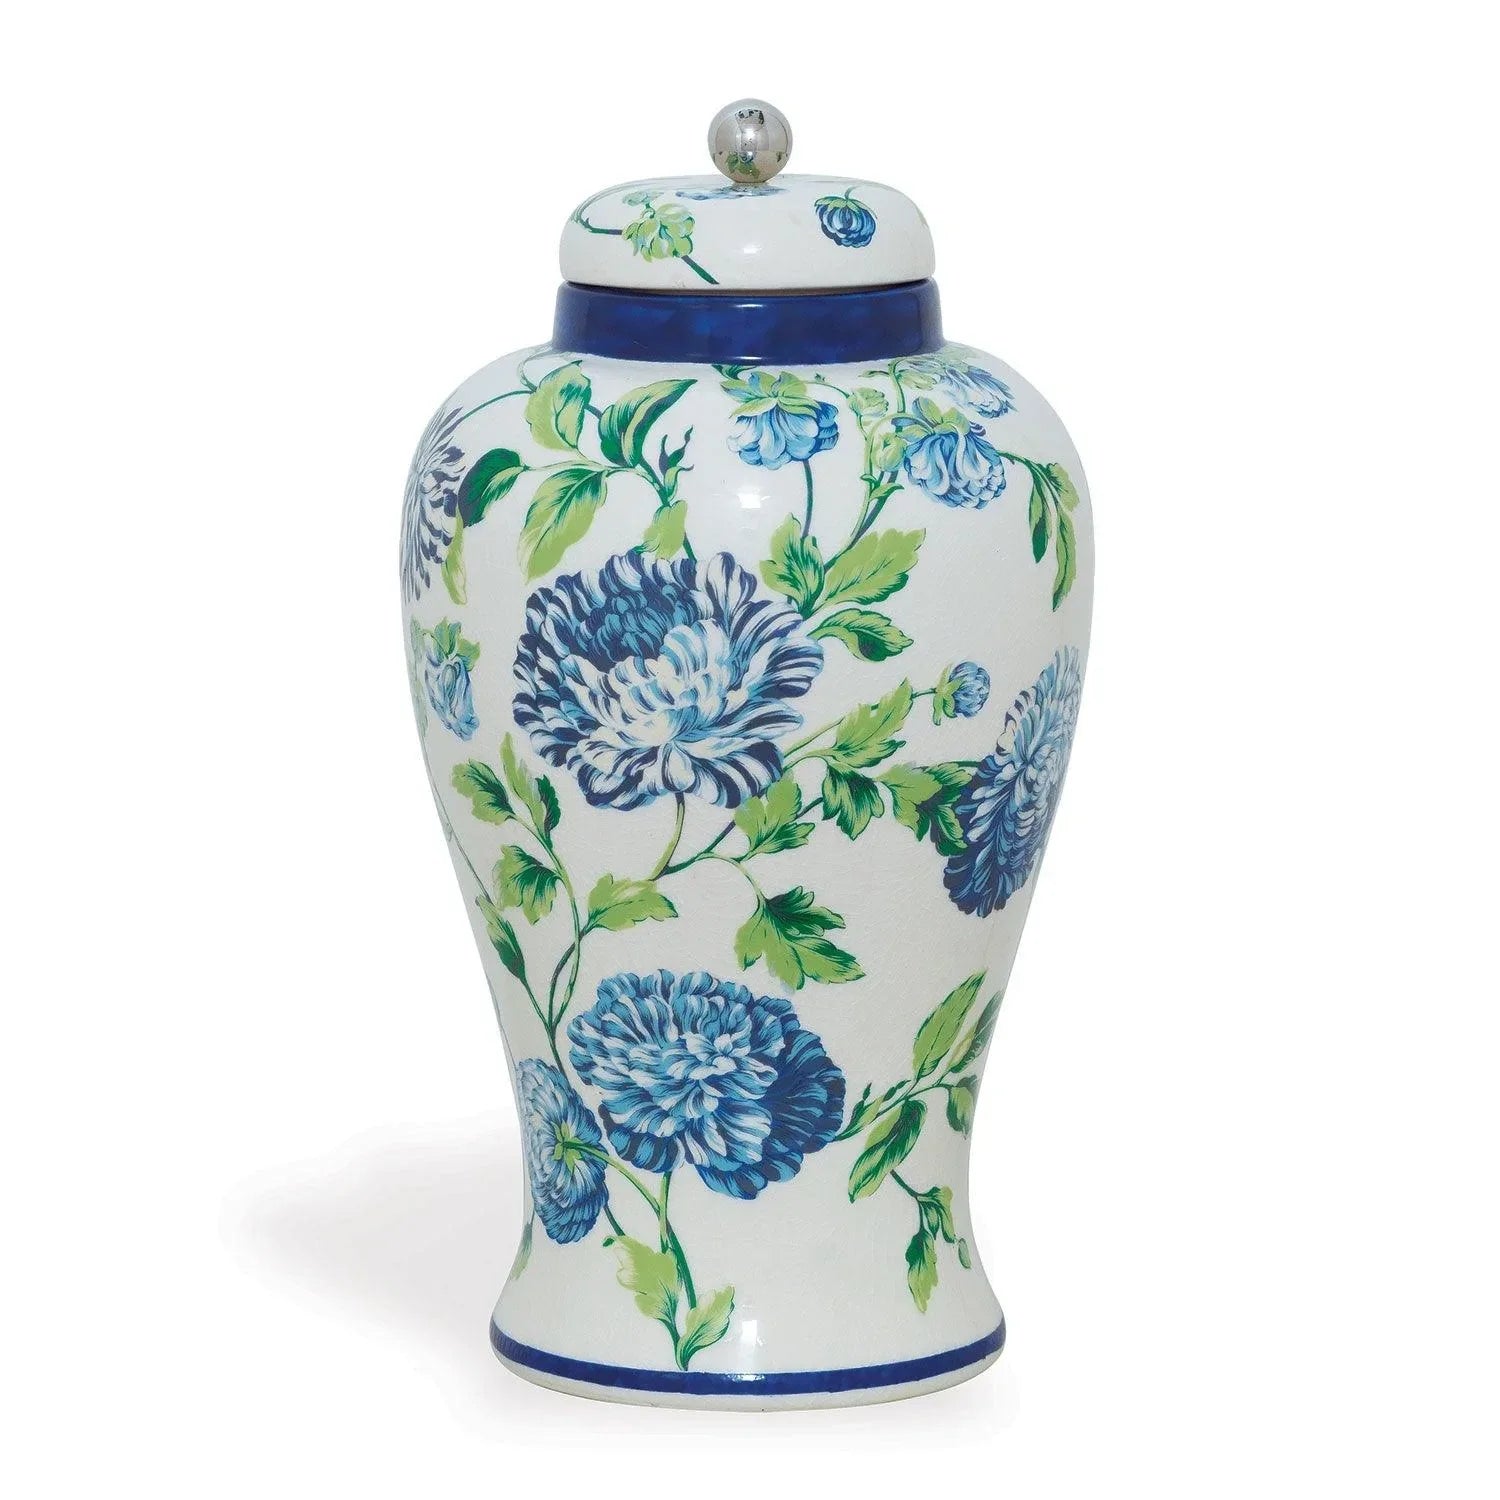 Williamsburg Collection Blue, Green and White Floral Ginger Jar